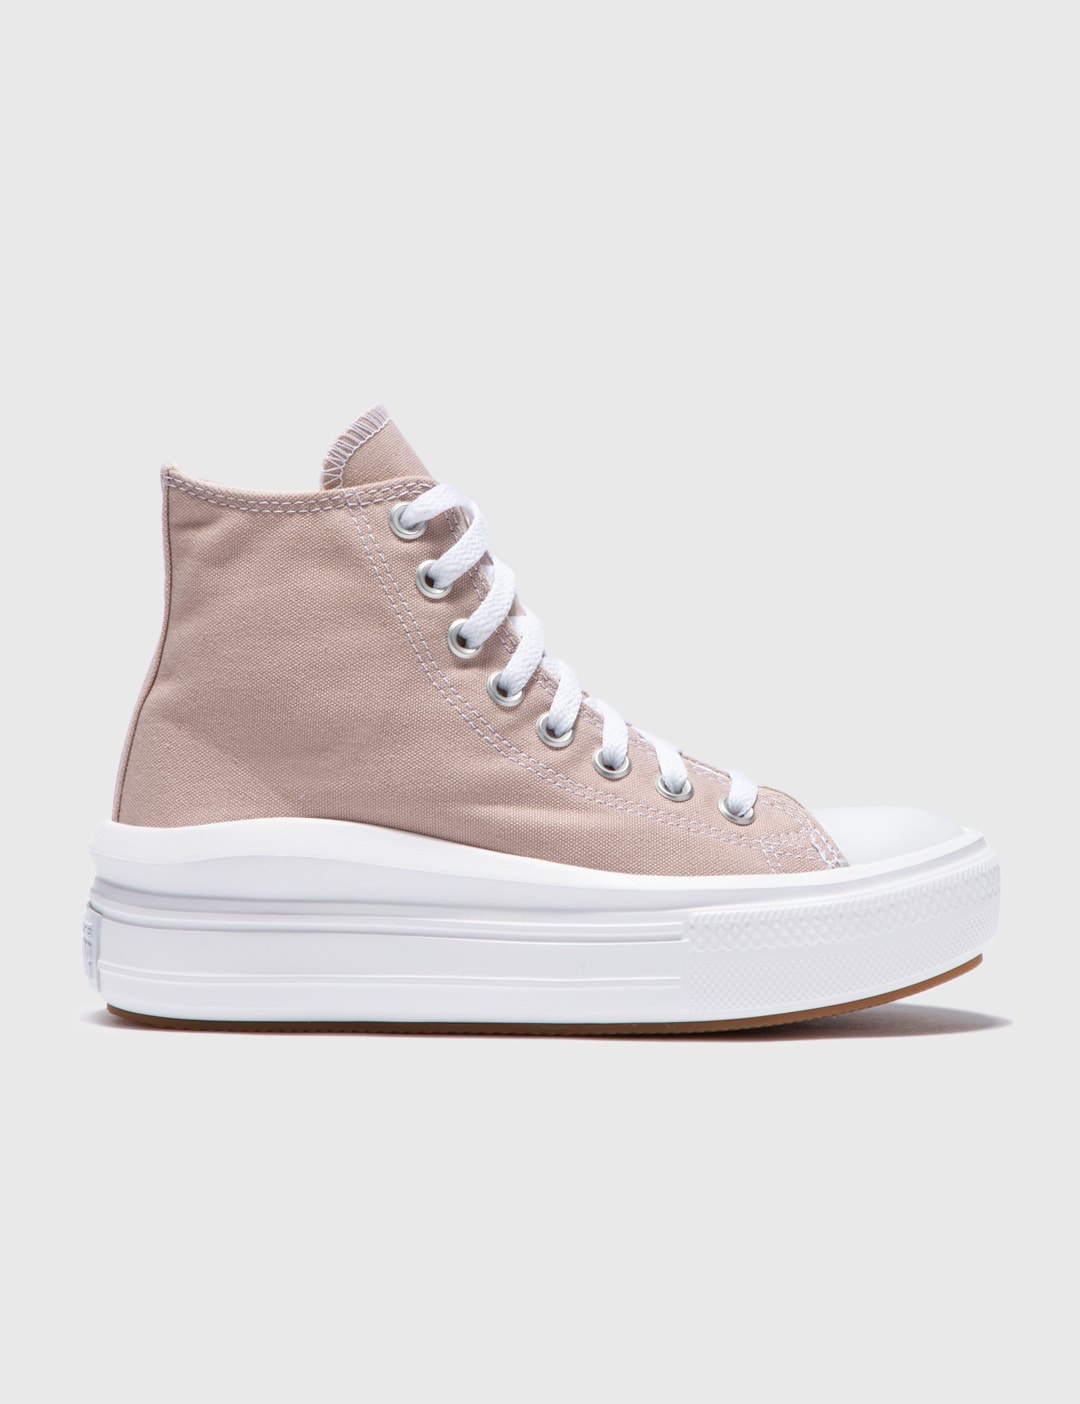 heroïne Rouwen stormloop Converse - Chuck Taylor All Star Move Platform | HBX - Globally Curated  Fashion and Lifestyle by Hypebeast